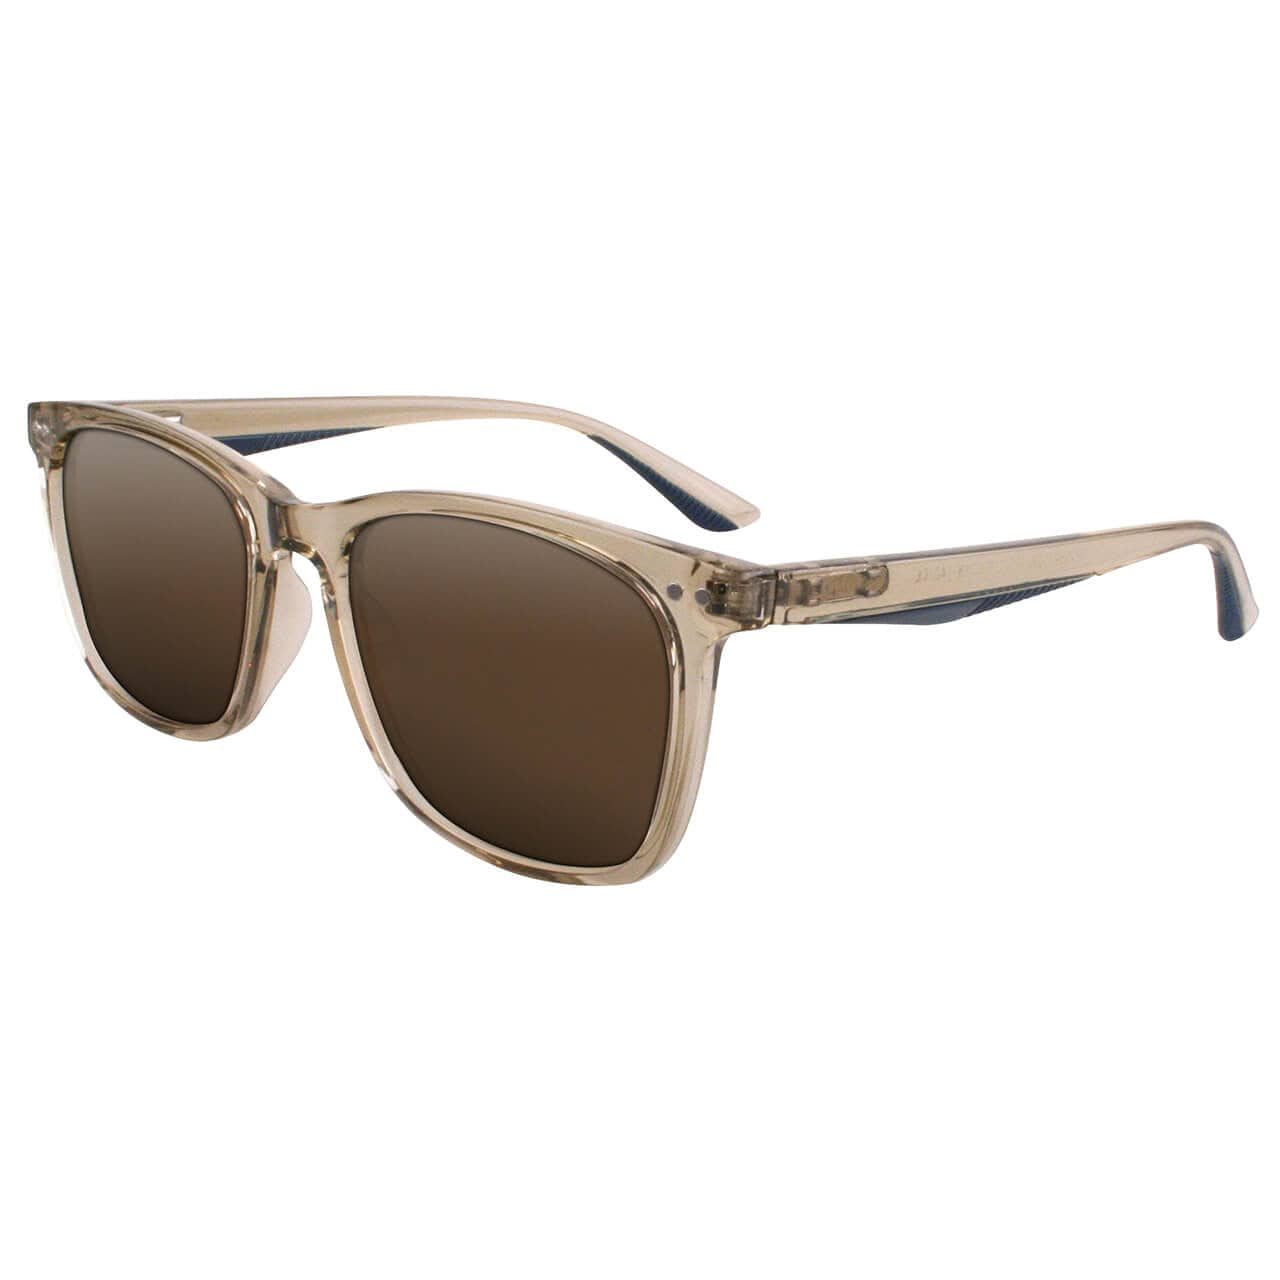 Solect Navigator Sunglasses with Brown Frame and Amber Polarized Lenses